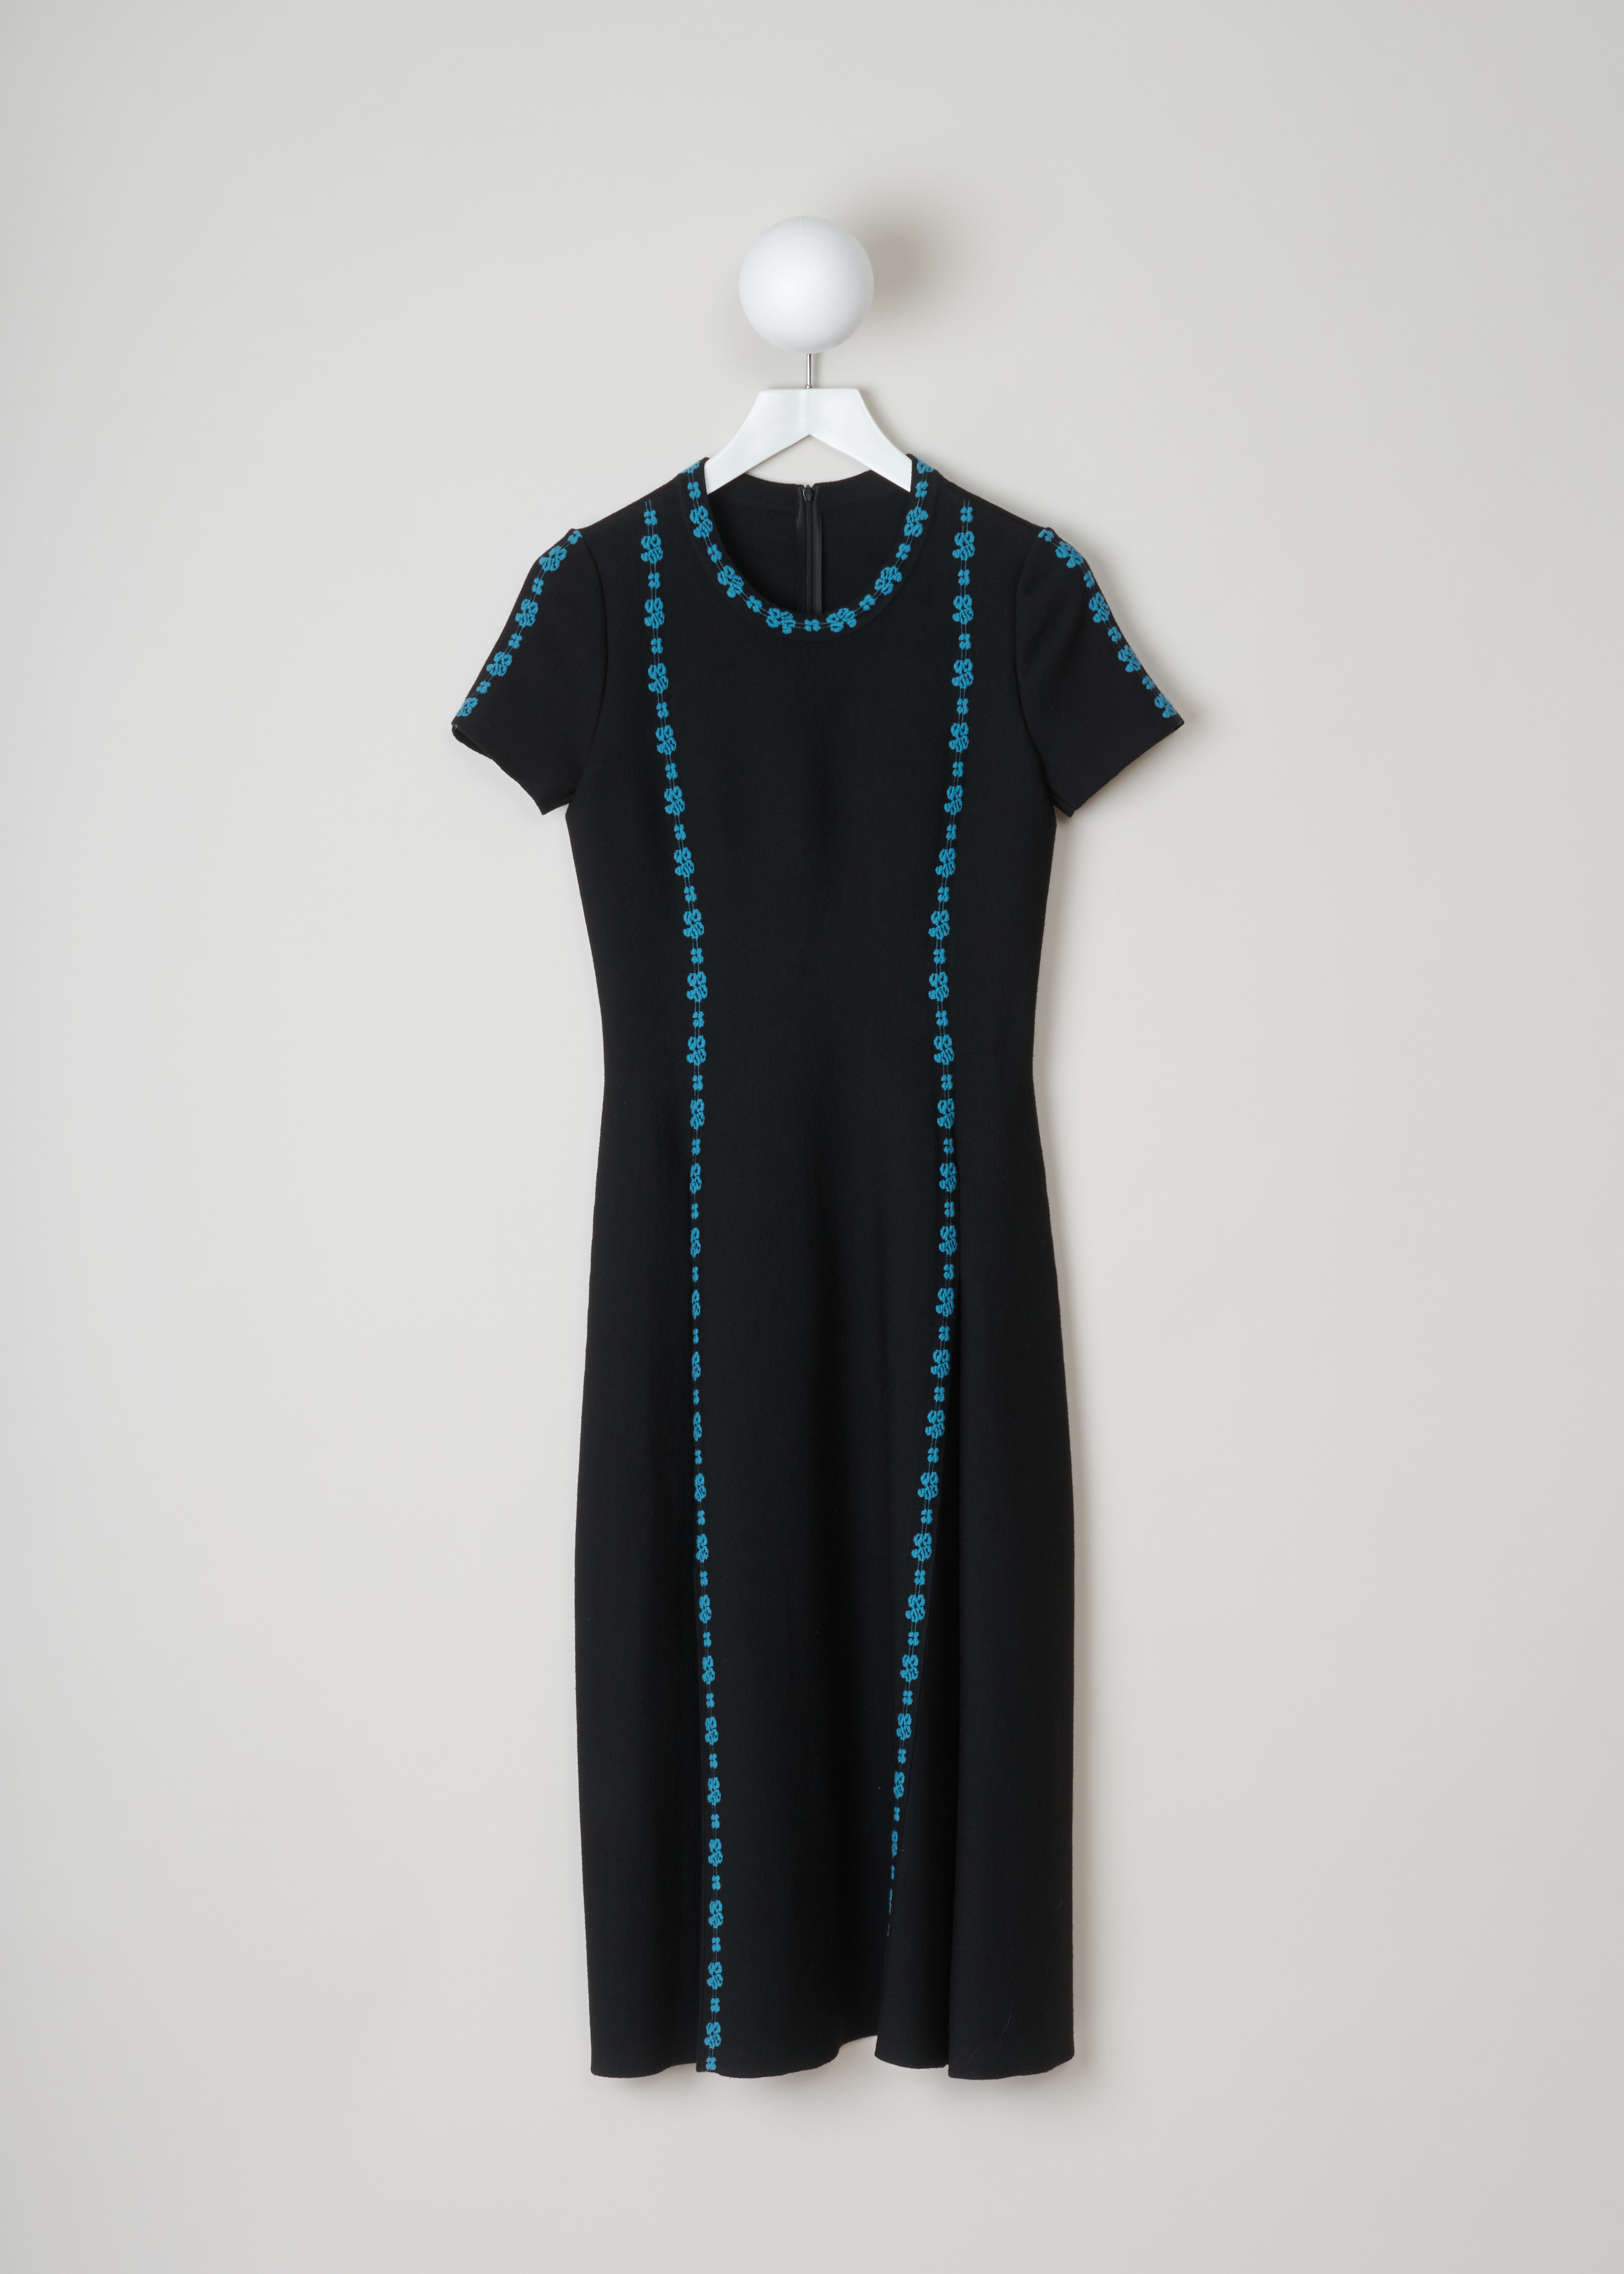 AlaÃ¯a Structure knitted dress 7H9RJ63LM364_C928 noir bleu front. Knitted midi dress with a flared skirt, structure knitted blue flower details, a round neckline, short sleeves and an invisible zipper fastening on the back.The dress is with a densely knitted wool-blend fabric which makes the garment heavy.